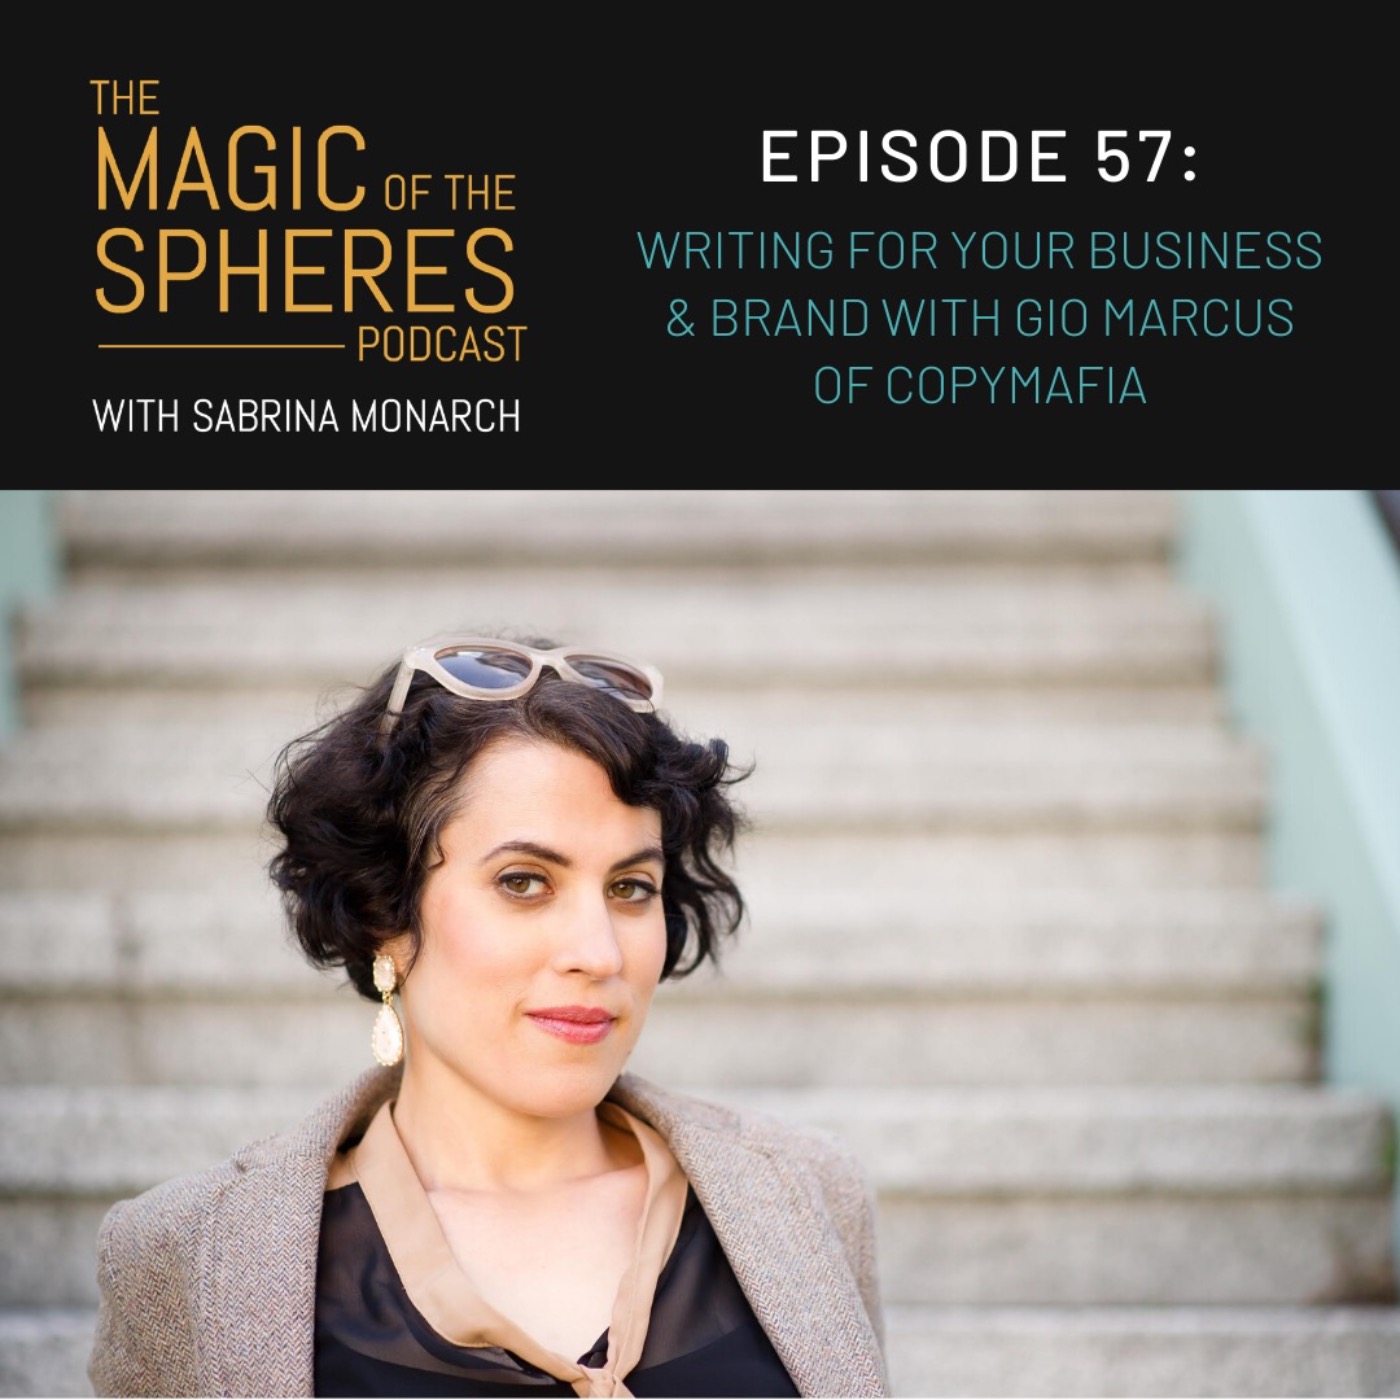 Writing for your Business & Brand with Gio Marcus of CopyMafia